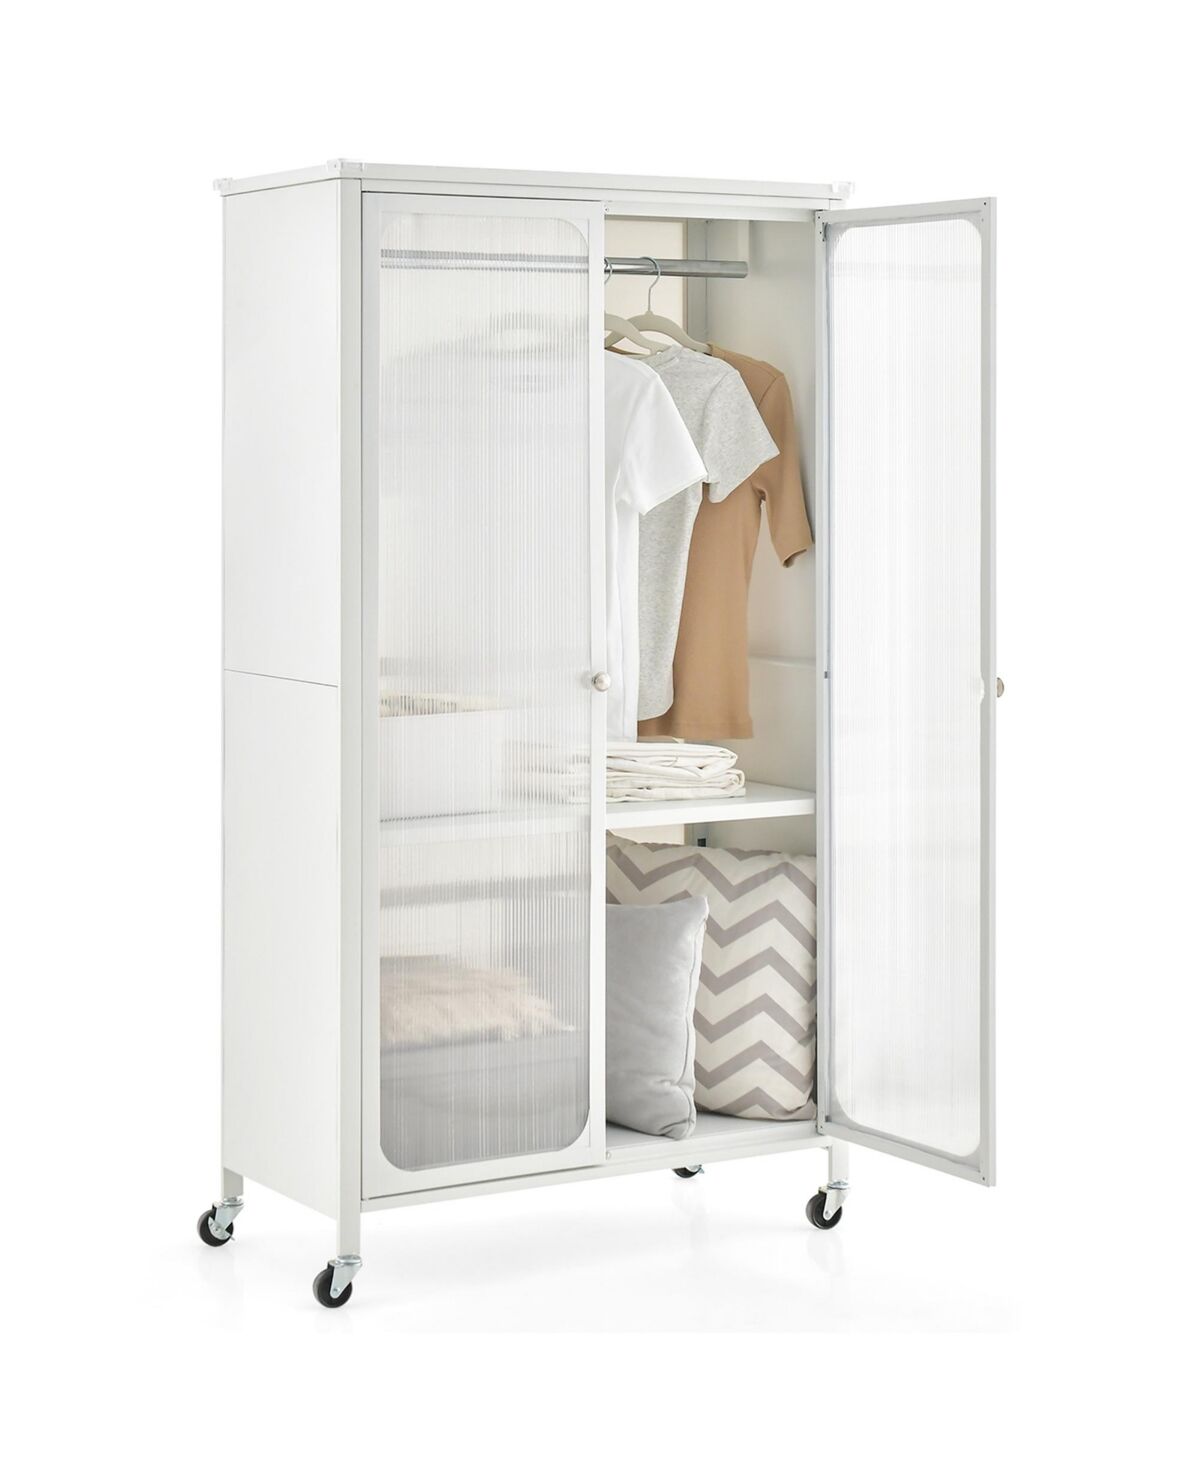 Costway Storage Wardrobe Cabinet Mobile Armoire Closet with Hanging Rod & Adjustable Shelf - White